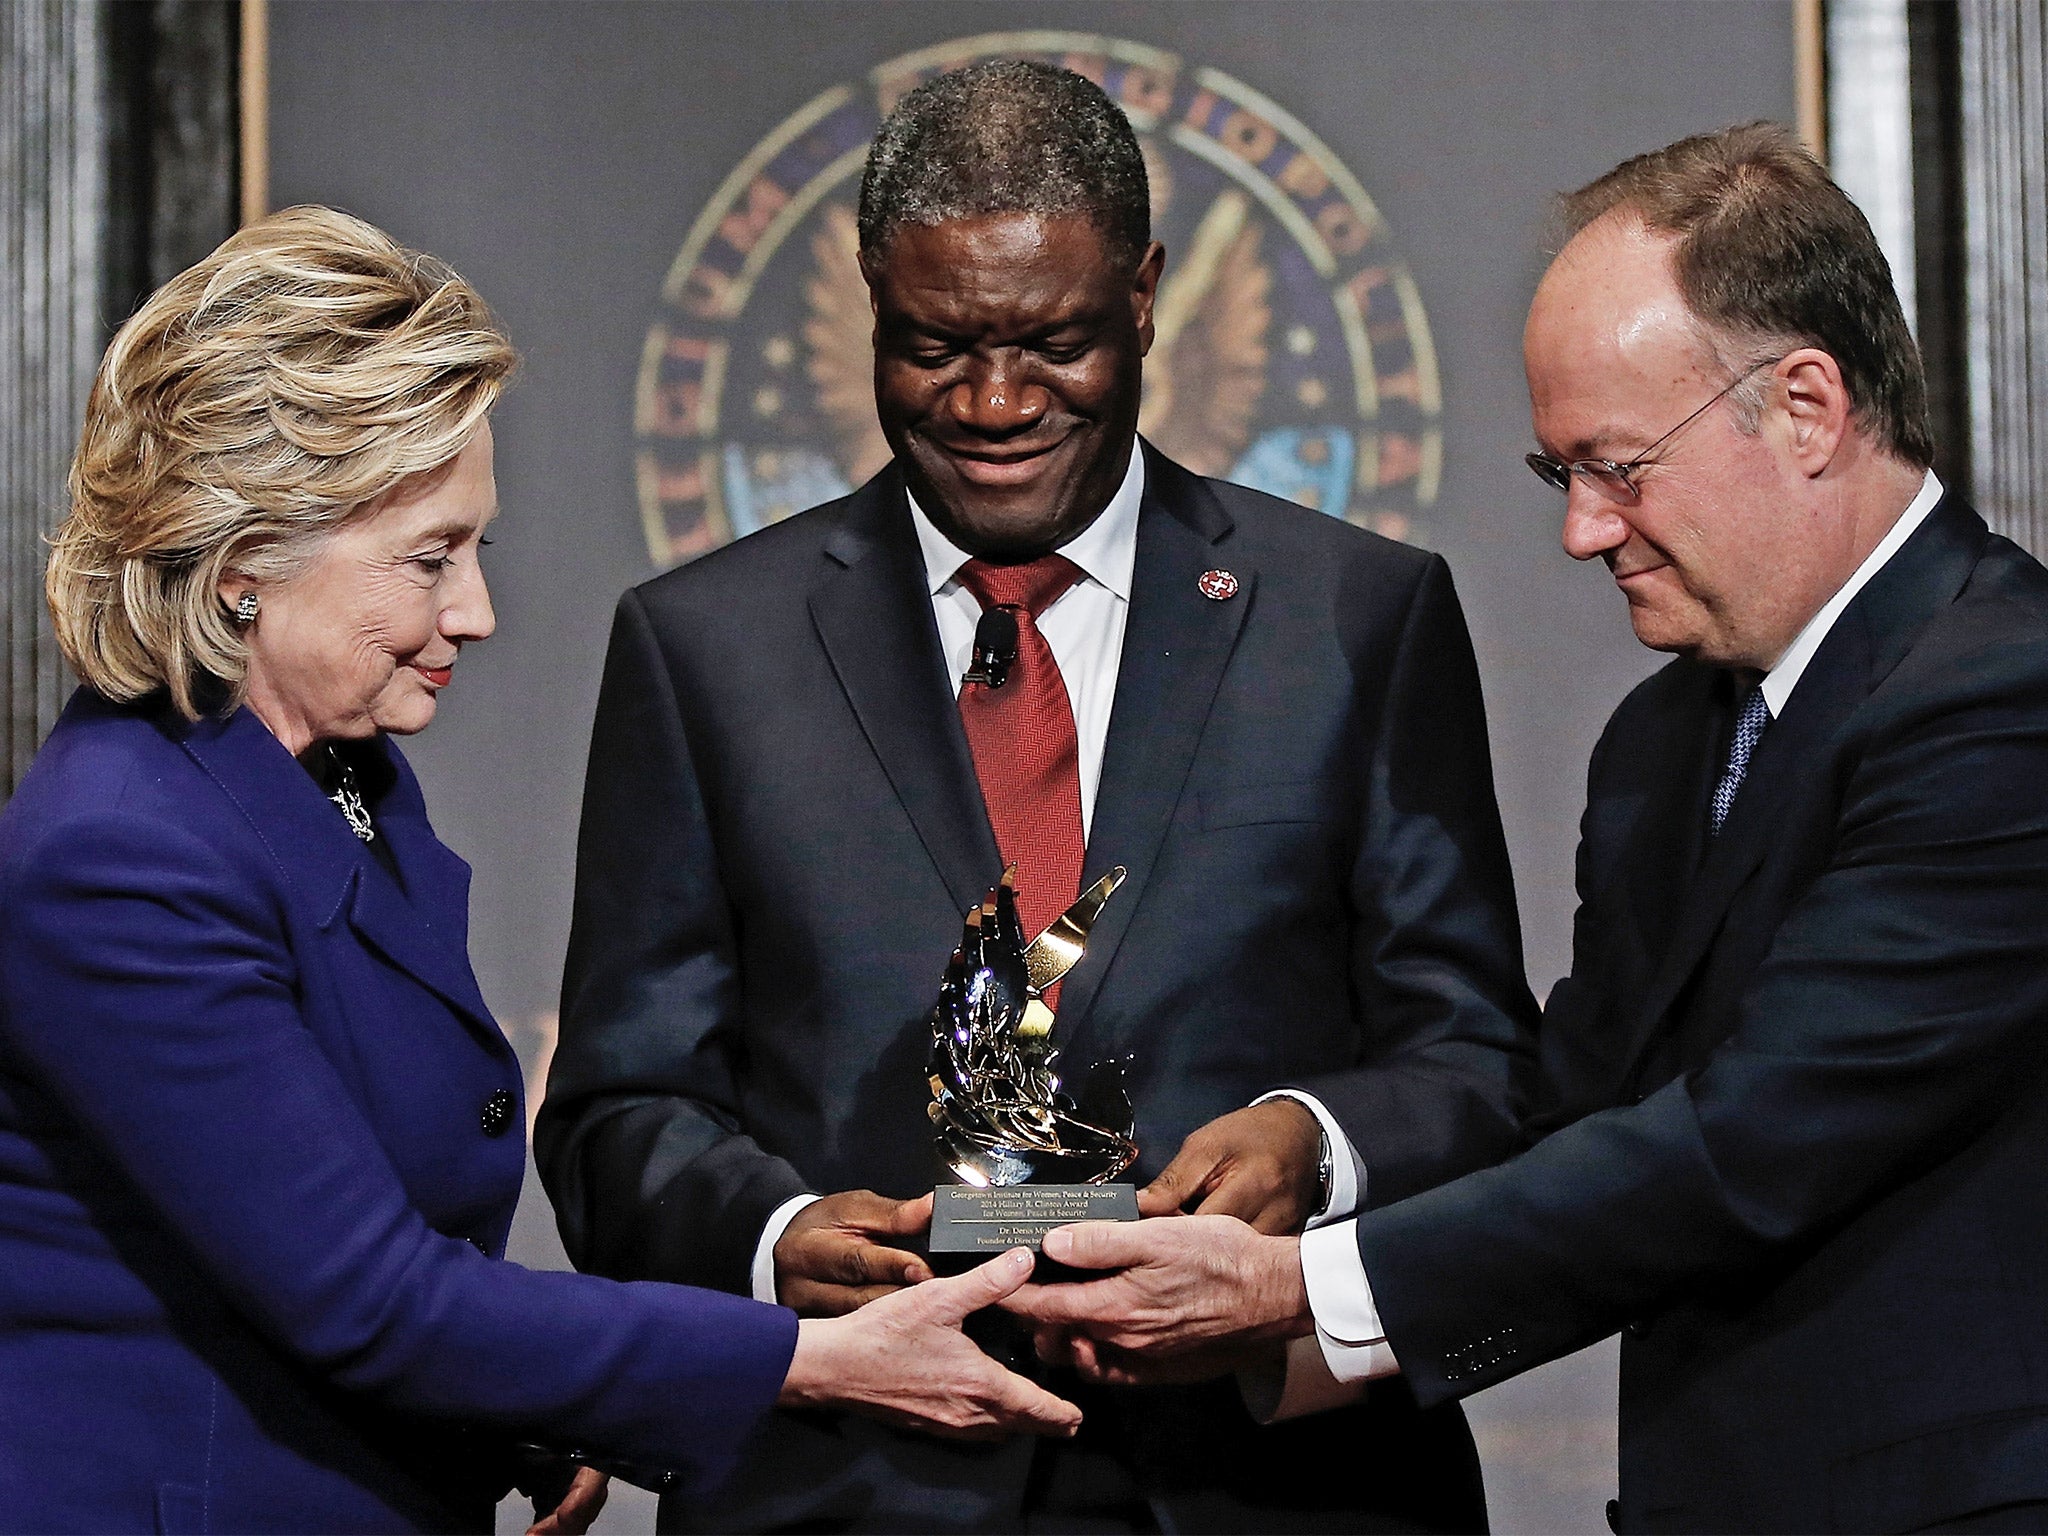 Force for good: Dr Denis Mukwege receives a humanitarian award from Hillary Clinton and Georgetown University head, John De Gioia